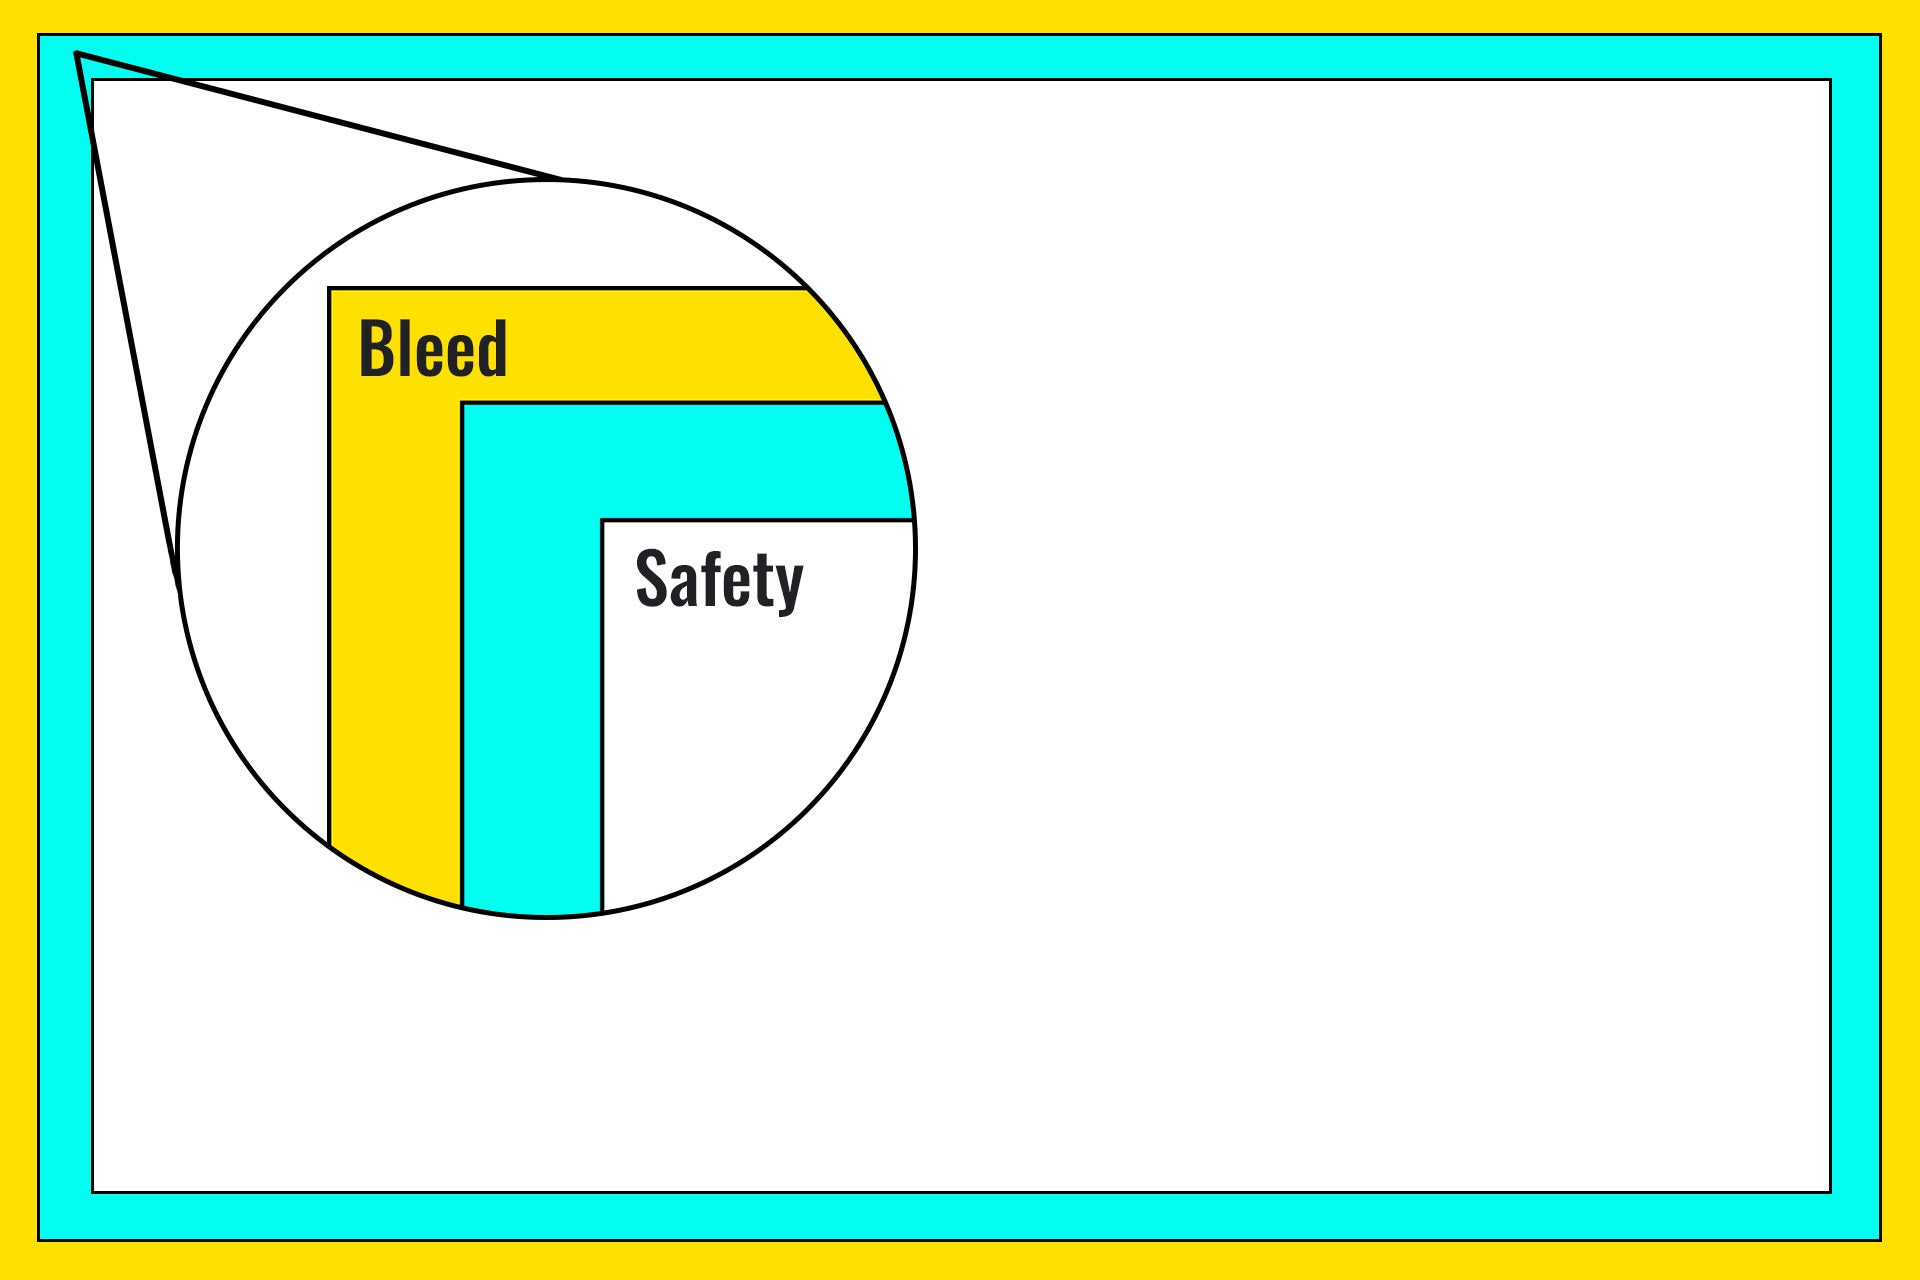 Diagram showin they layout for Bleed, Trim, and Safety area for a custom packaging layout